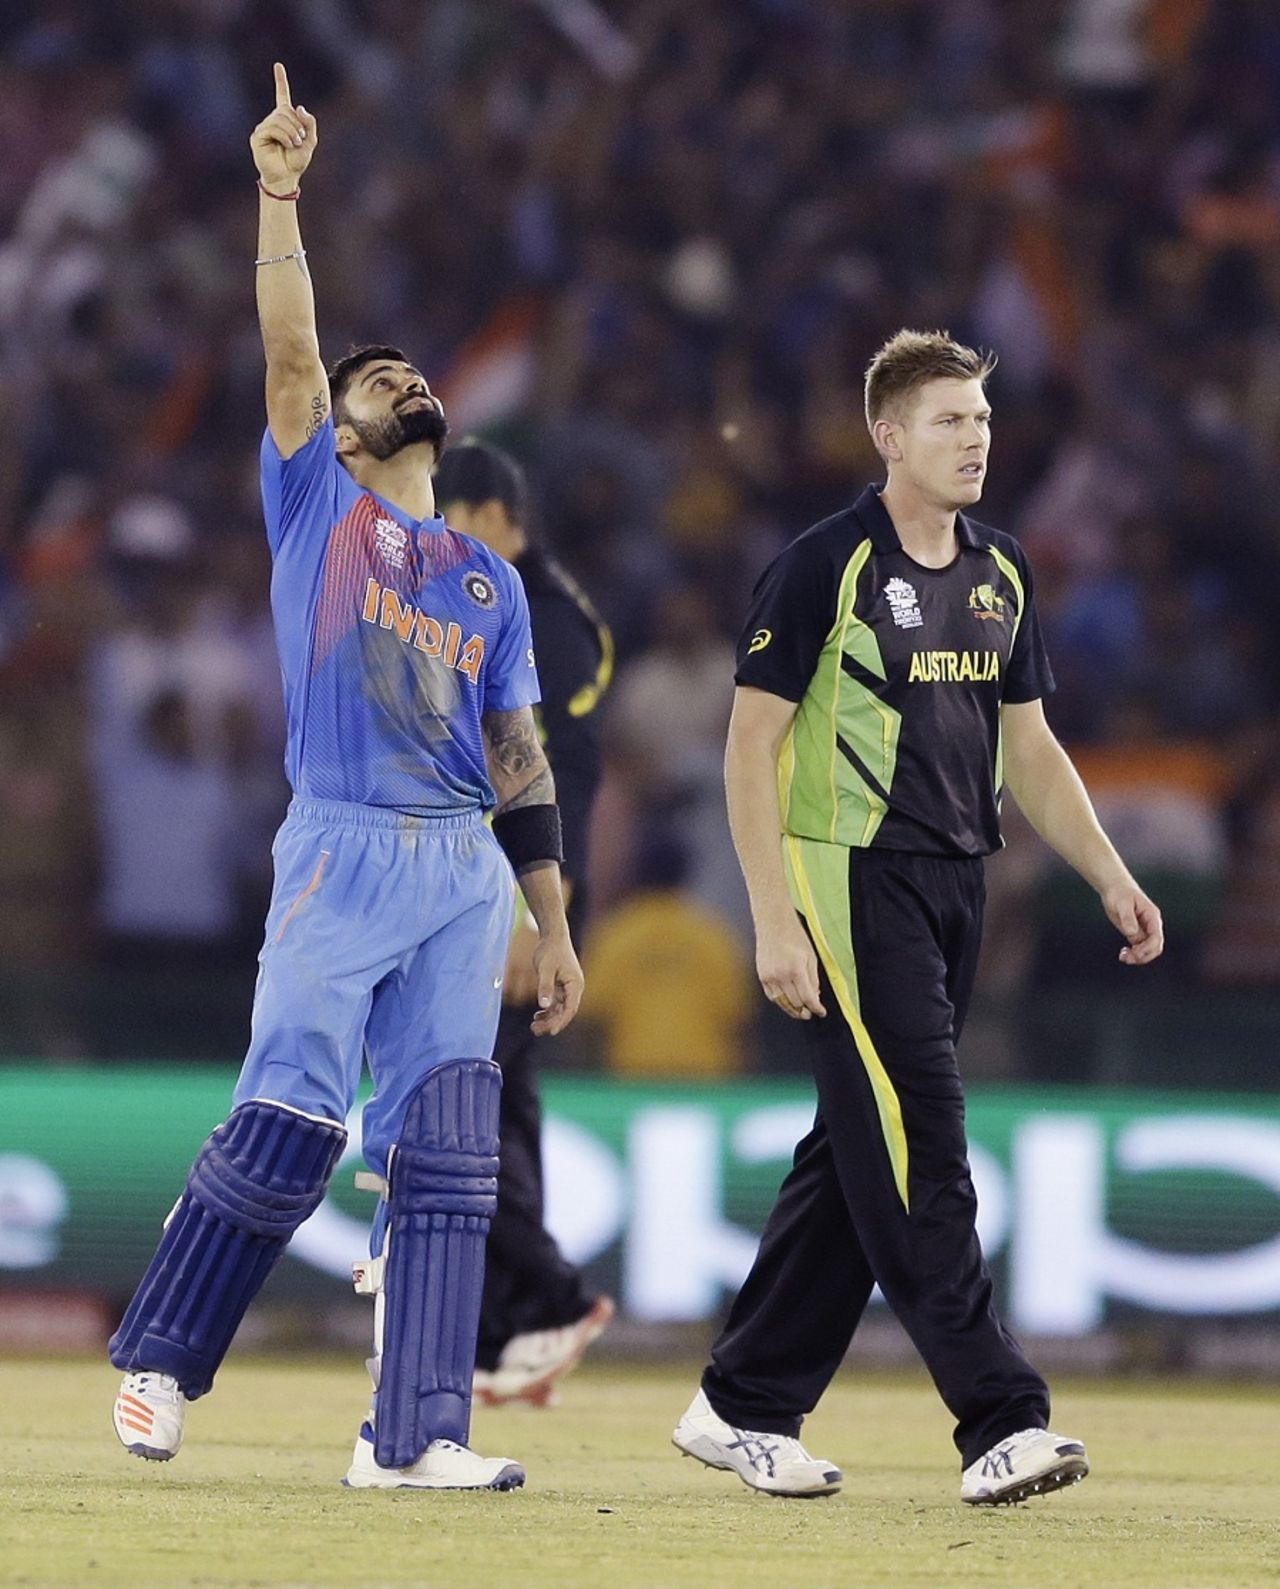 Virat Kohli celebrates after sealing yet another chase for India, while James Faulkner looks dejected, Australia v India, World T20 2016, Group 2, Mohali, March 27, 2016